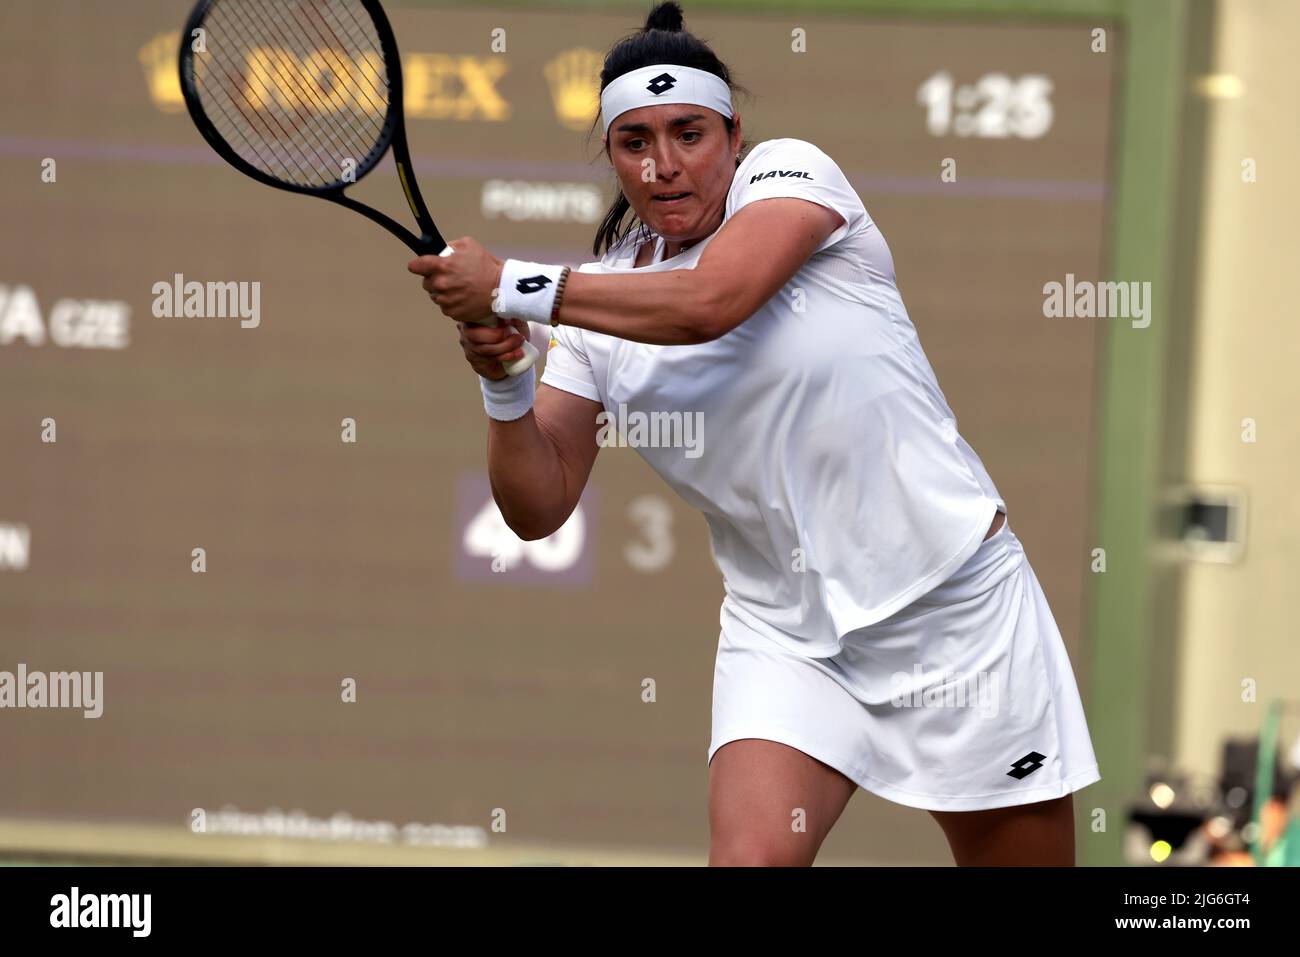 5 July 2022, All England Lawn Tennis Club, Wimbledon, London, United Kingdom:  Tunisia's Ons Jabeur strikes a backhand return to Marie Bouzkova of the Czech Republic during their quarterfinal match at Wimbledon today.  Jabeur won the match to advance to the semi finals. Stock Photo